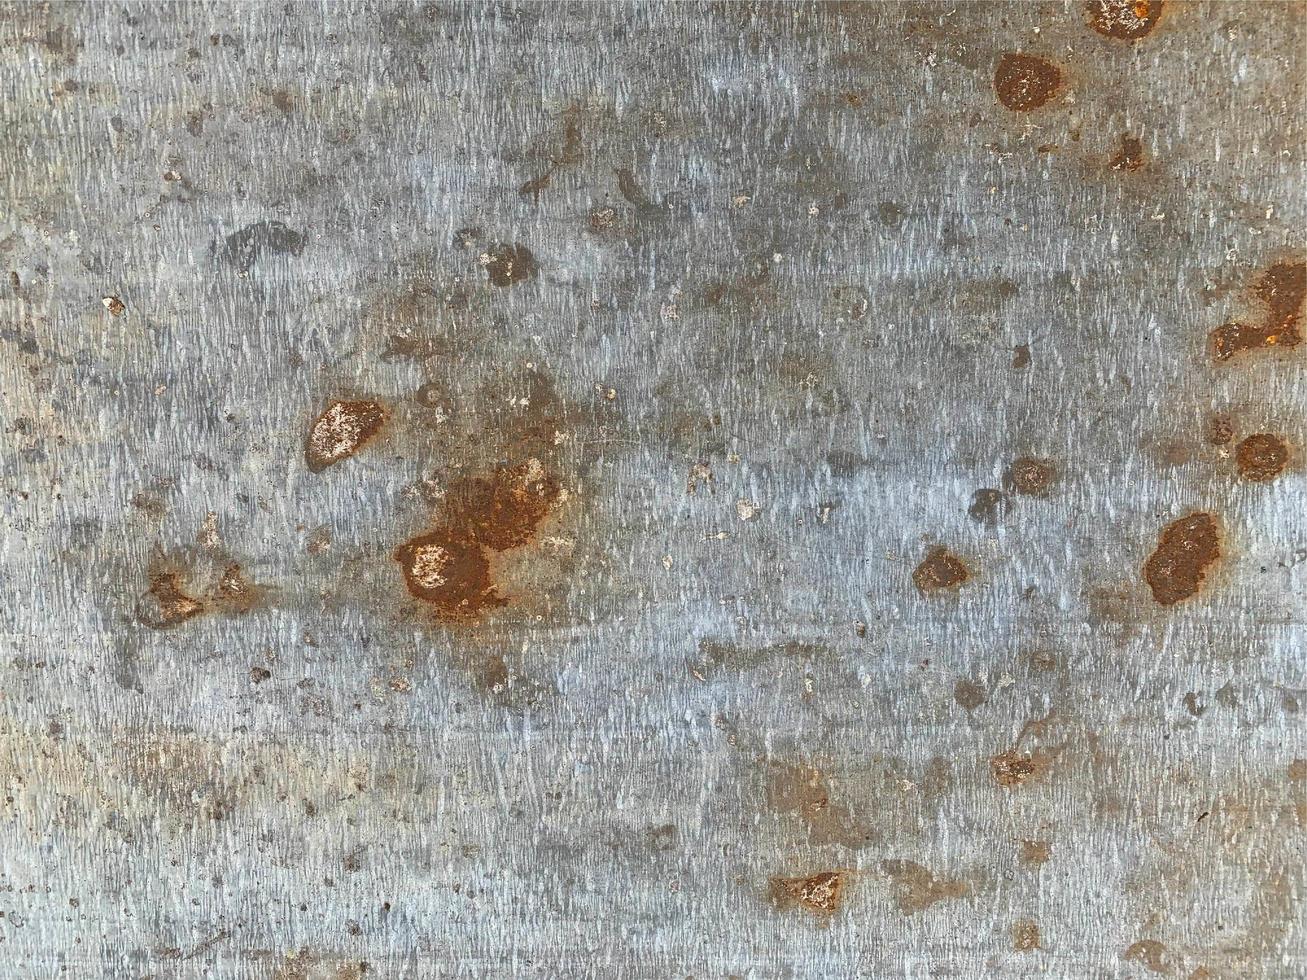 Rusty metal surface texture. Rusty Background photo